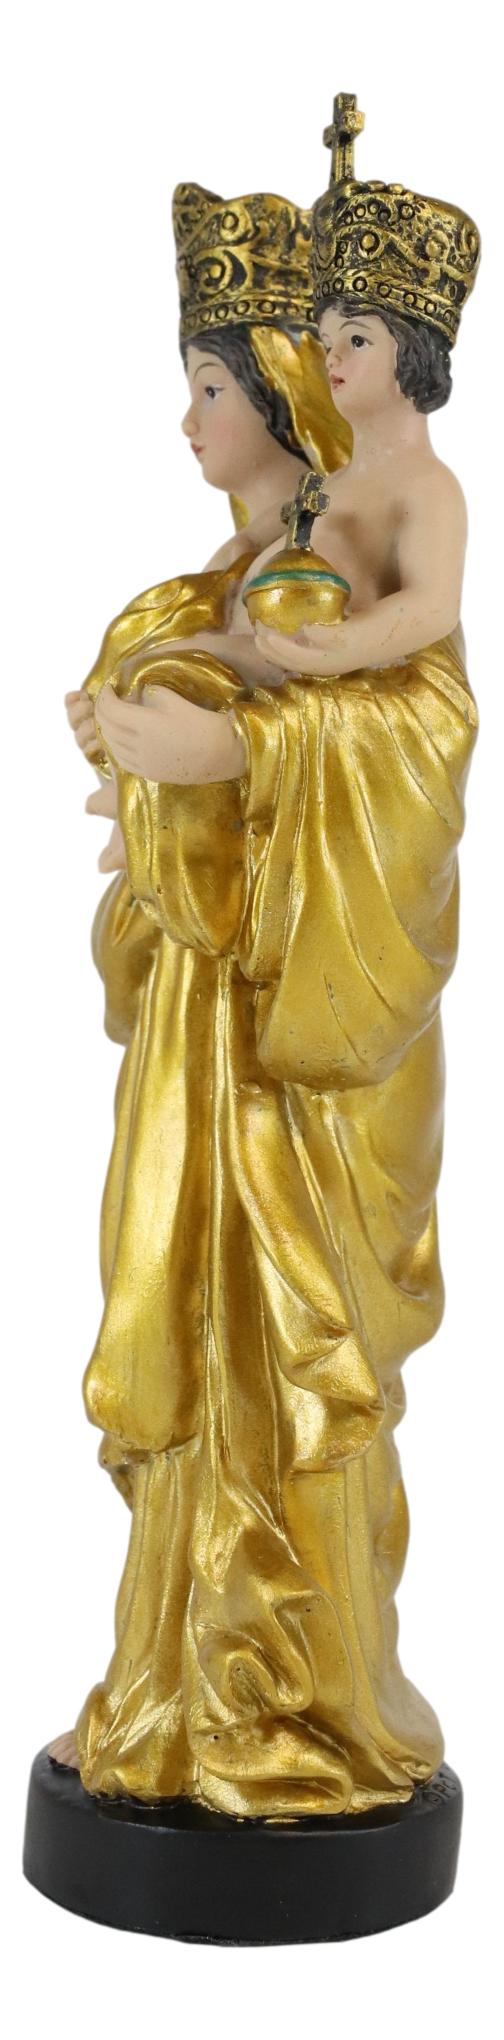 Ebros Our Lady Of Prompt Succor Blessed Virgin Mary With Baby Jesus Catholic Figurine 8.75"H